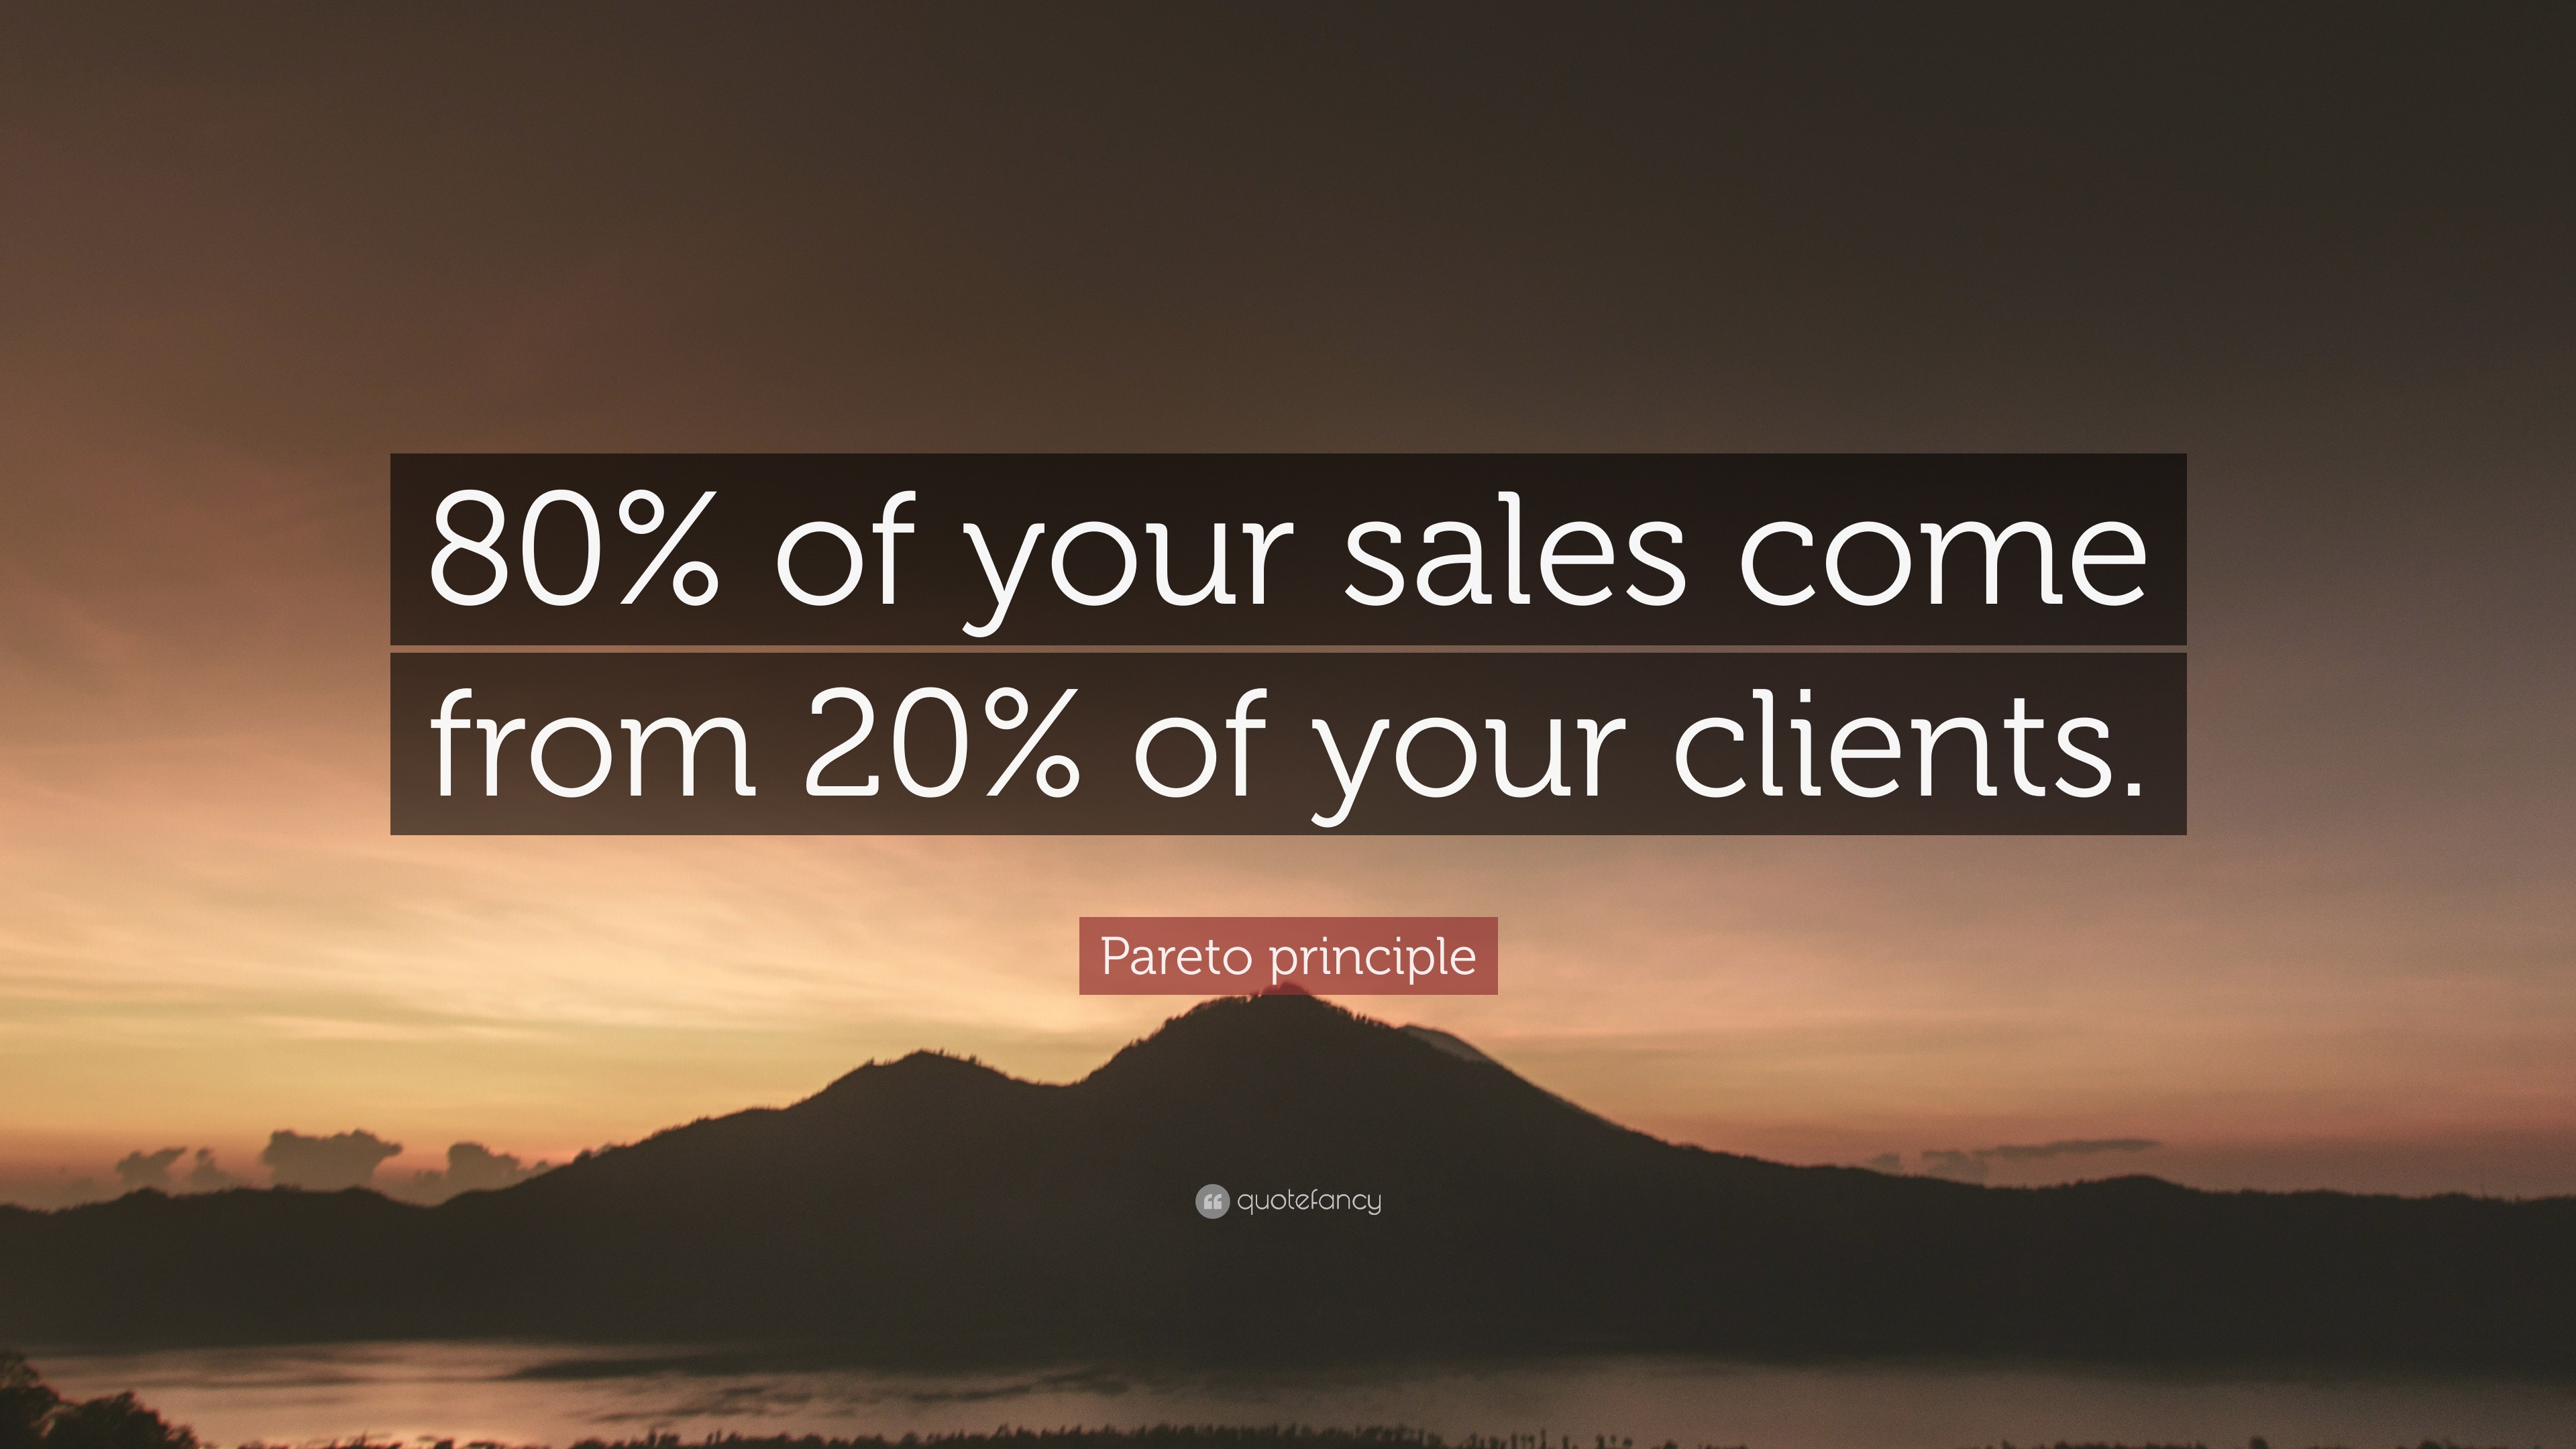 Pareto principle Quote: “80% of your sales come from 20% of your